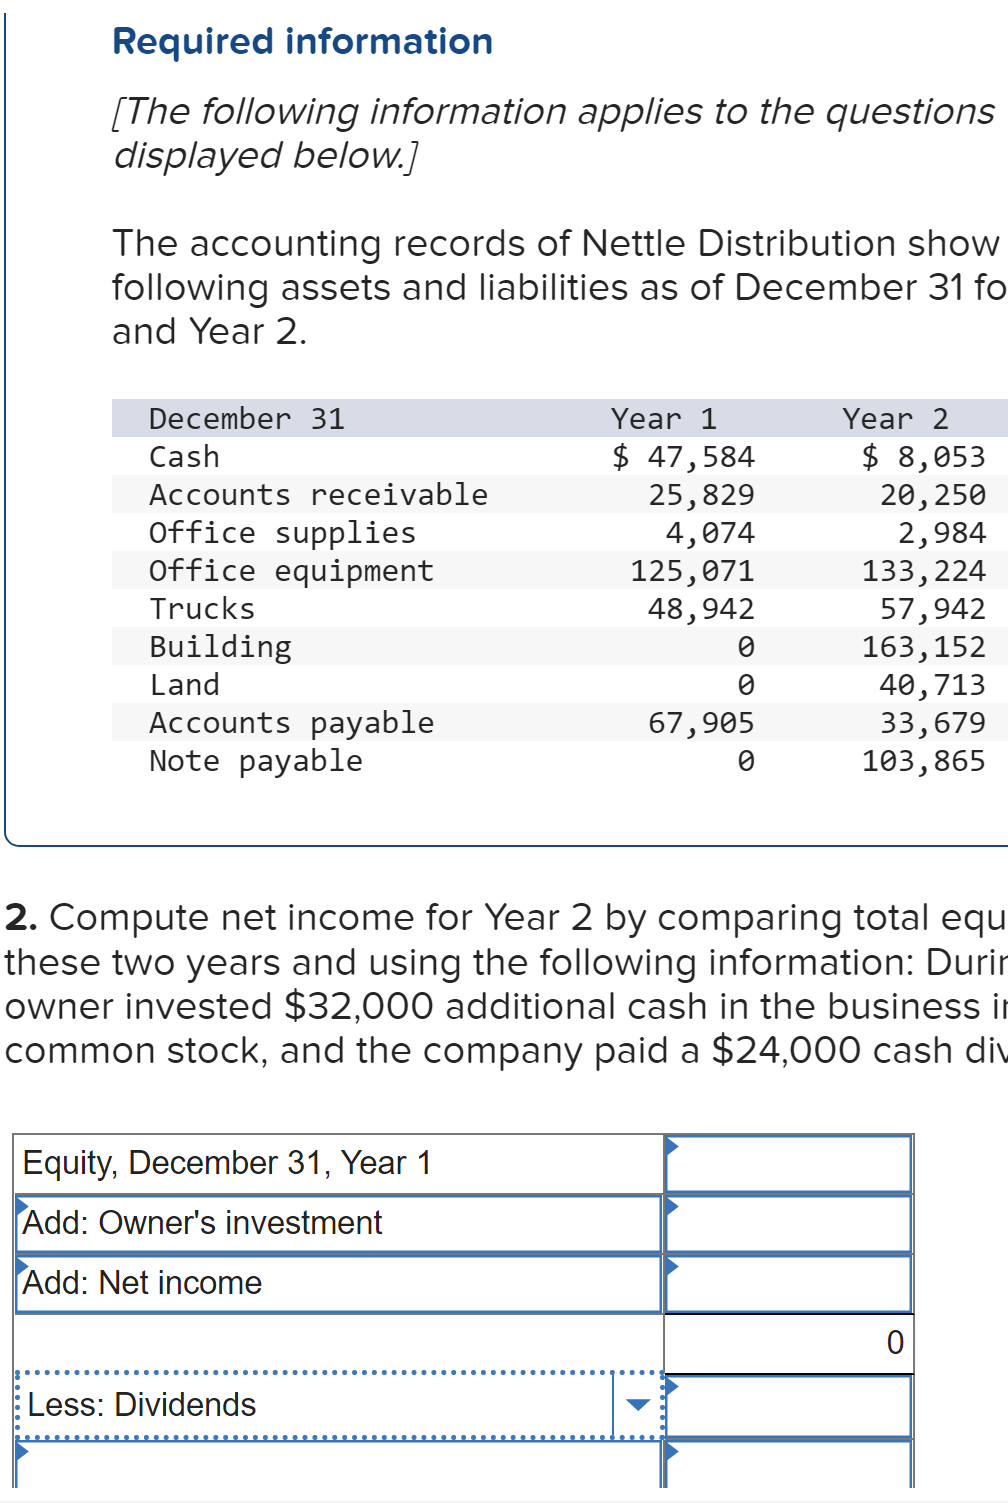 Required information
[The following information applies to the questions
displayed below.]
The accounting records of Nettle Distribution show
following assets and liabilities as of December 31 fo
and Year 2.
December 31
Cash
Accounts receivable
Office supplies
Office equipment
Trucks
Building
Land
Accounts payable
Note payable
Equity, December 31, Year 1
Add: Owner's investment
Add: Net income
Year 1
$ 47,584
25,829
4,074
125,071
48,942
Less: Dividends
0
0
67,905
0
Year 2
$ 8,053
20, 250
2,984
133, 224
2. Compute net income for Year 2 by comparing total equ
these two years and using the following information: Durir
owner invested $32,000 additional cash in the business in
common stock, and the company paid a $24,000 cash div
57,942
163,152
40,713
33,679
103,865
0